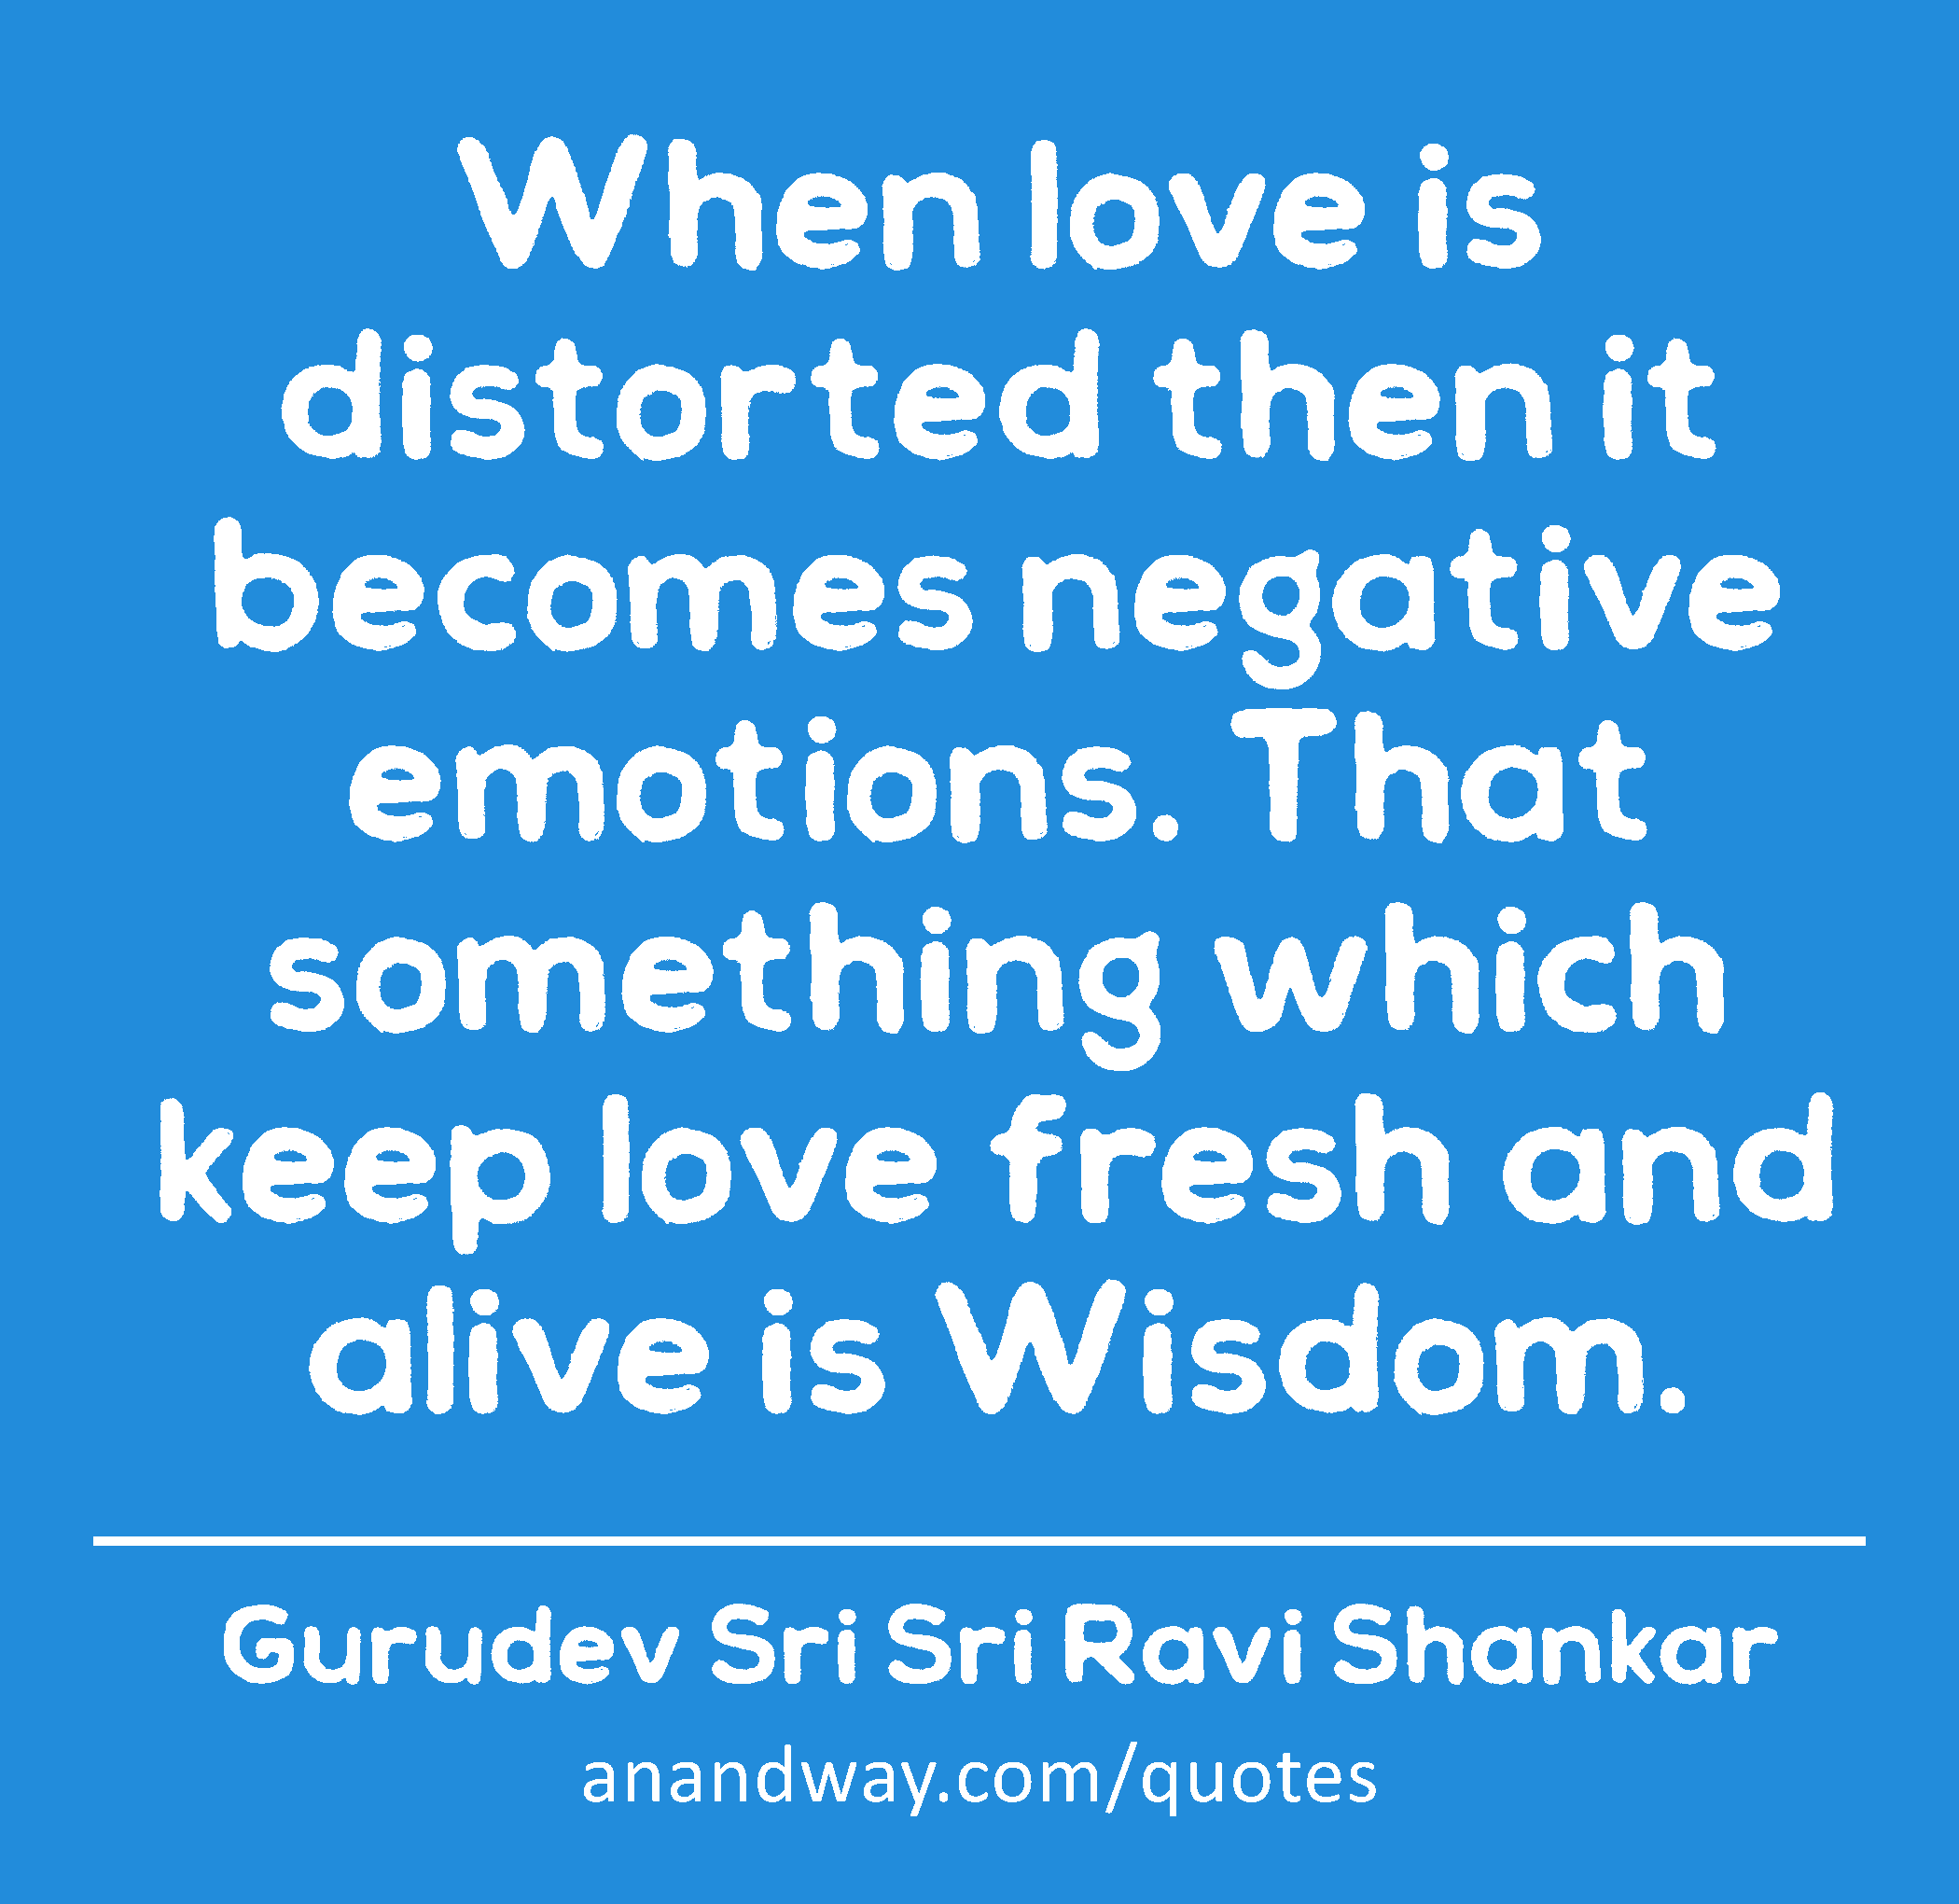 When love is distorted then it becomes negative emotions. That something which keep love fresh and
 -Gurudev Sri Sri Ravi Shankar